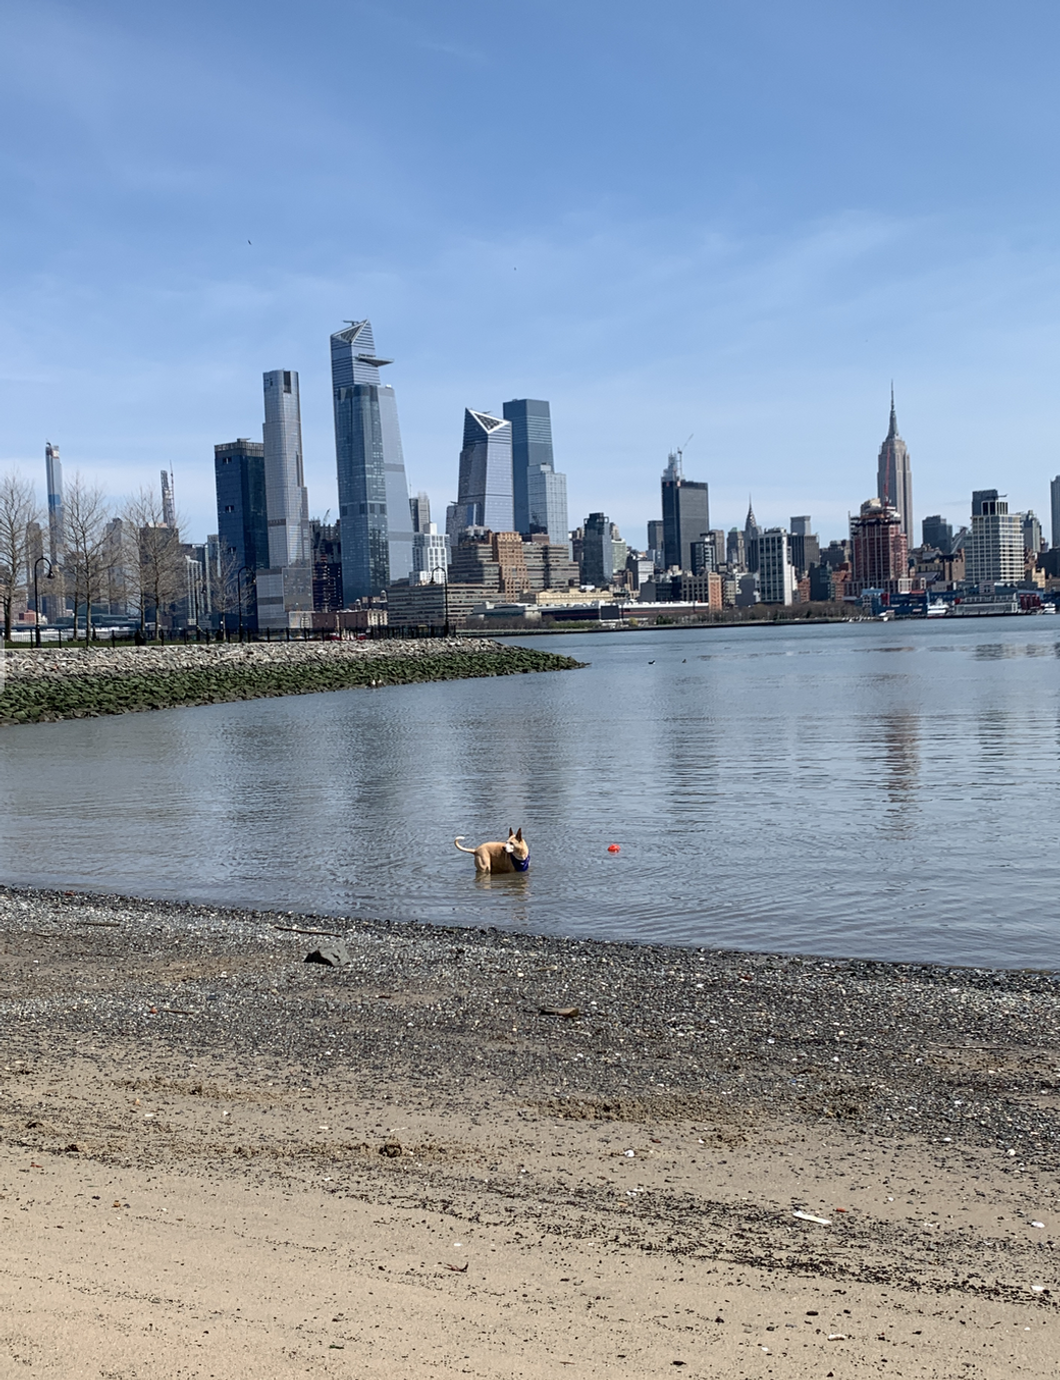 8 Things You Notice About Hoboken AFTER 21 Days In Quarantine